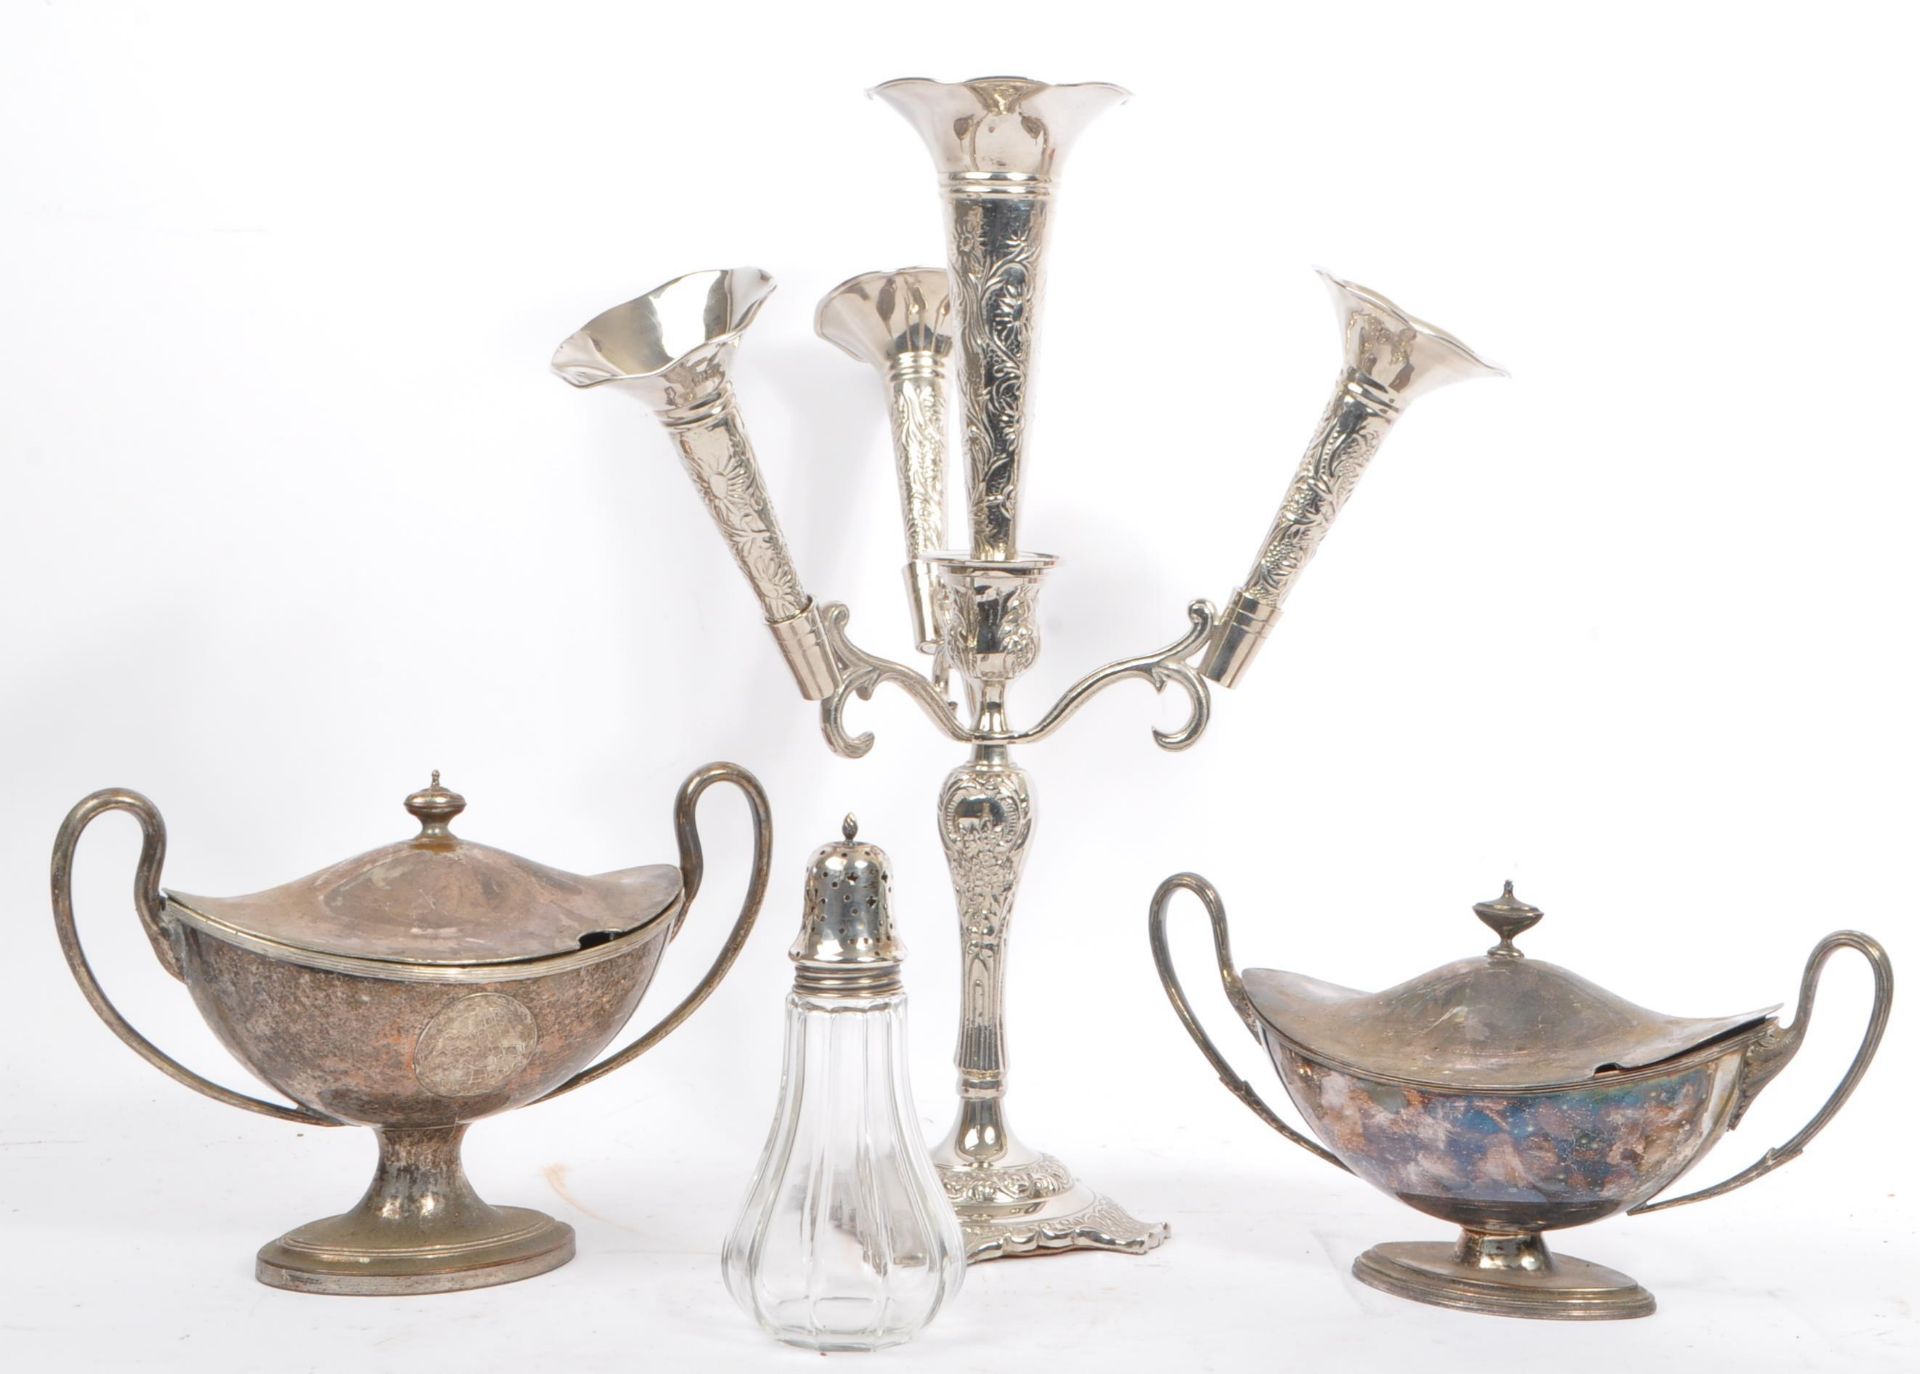 COLLECTION OF 19TH CENTURY SILVER PLATE TABLEWARE